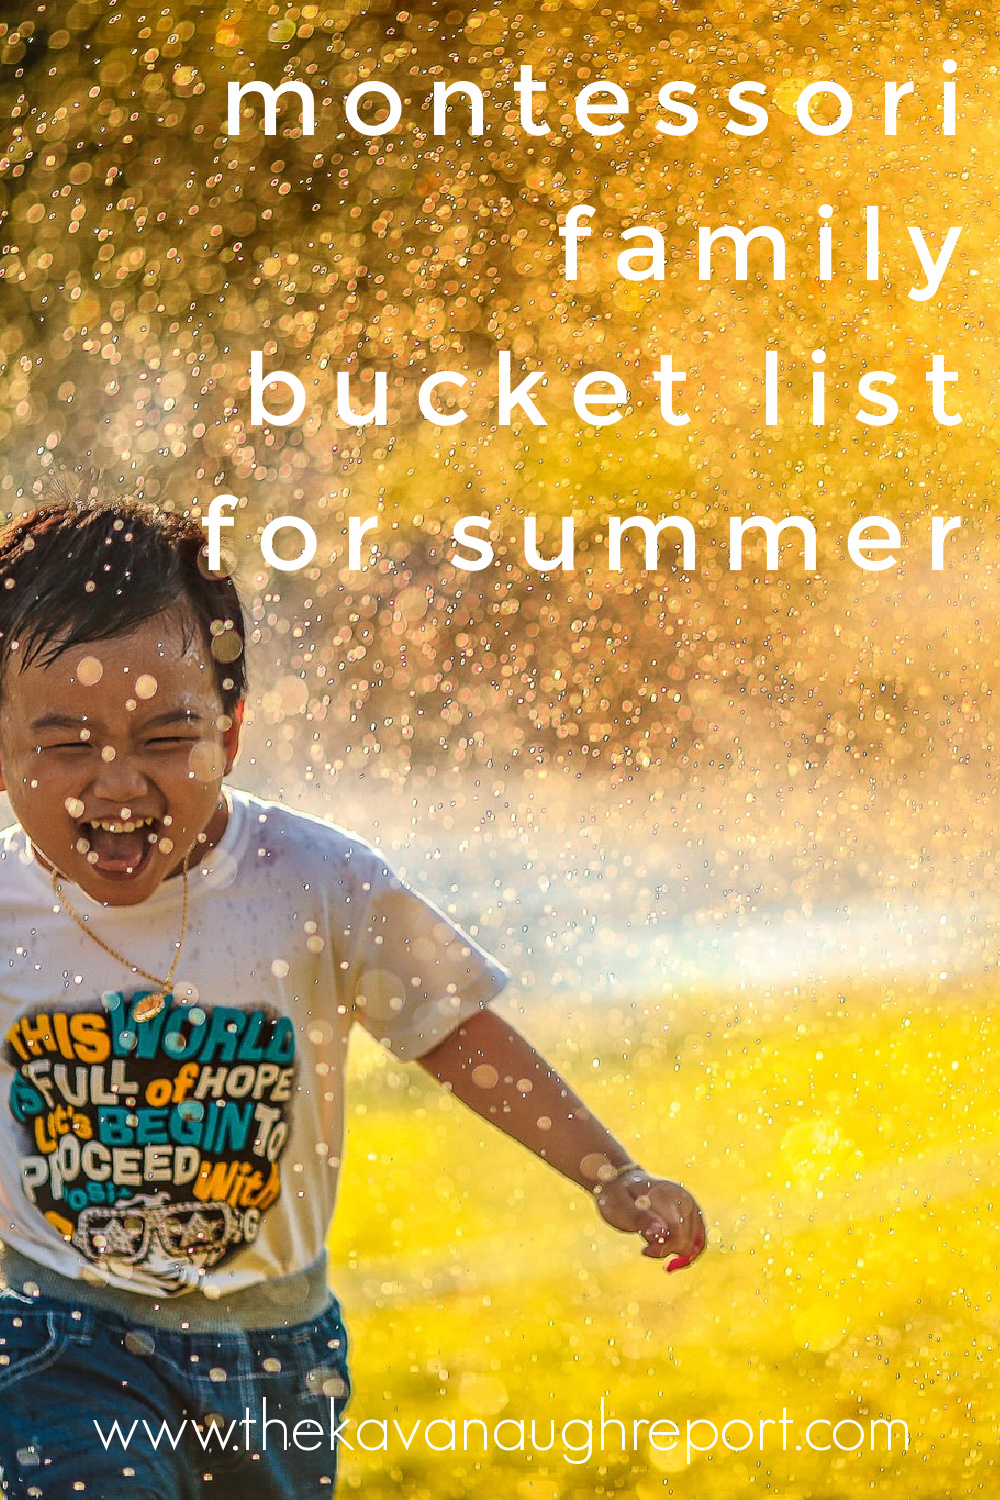 Montessori friendly activities and outings for summer time. These easy ideas are perfect for a variety of age groups and budgets.